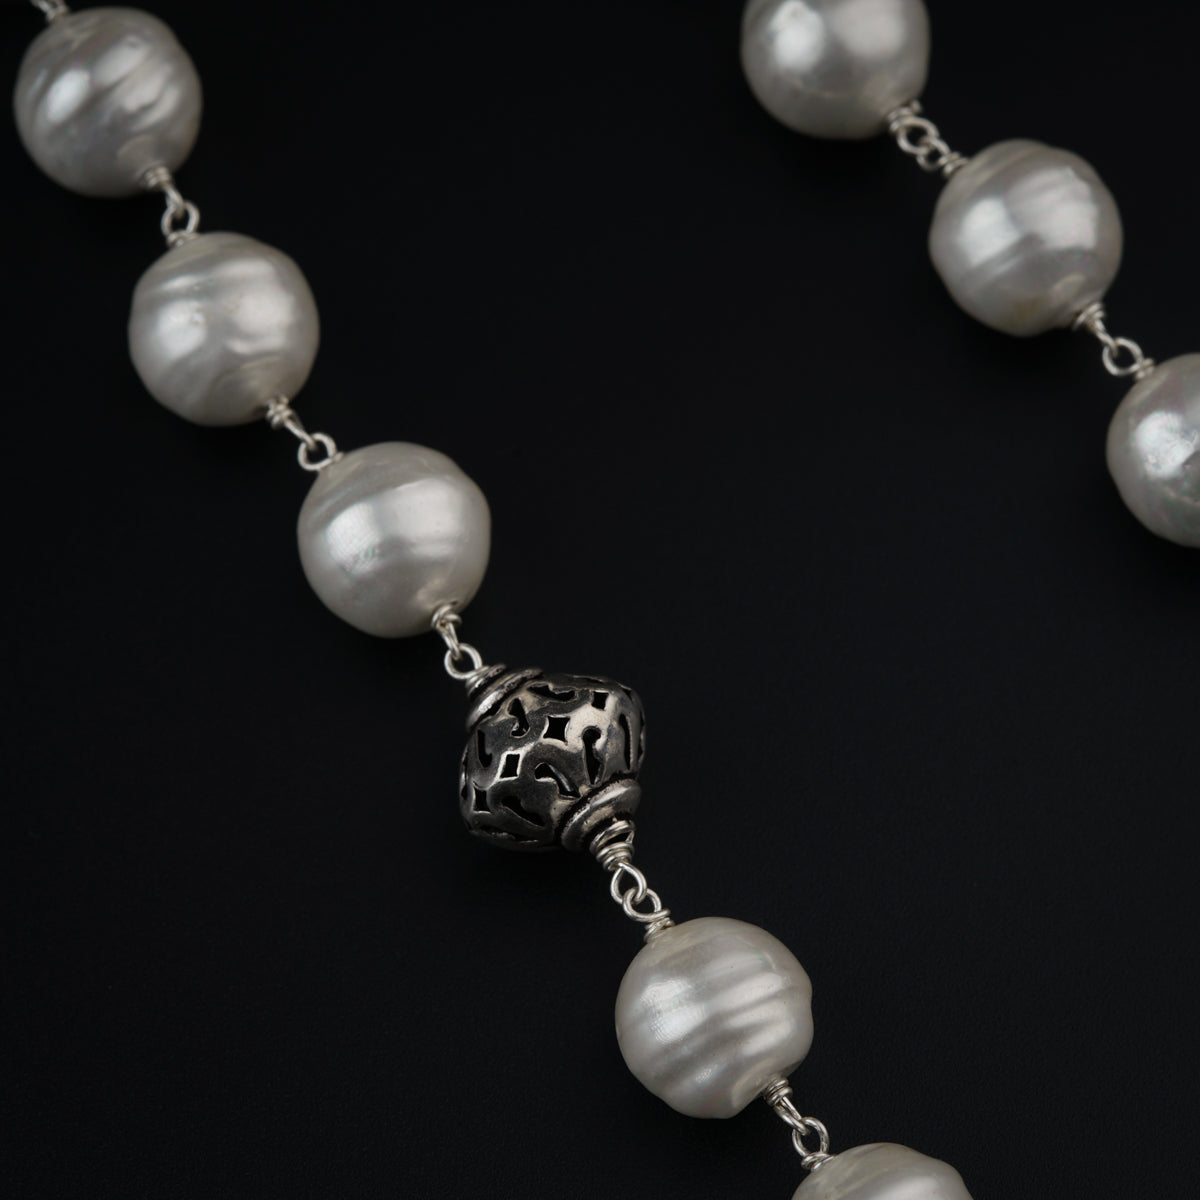 a necklace with a skull and pearls on a black background